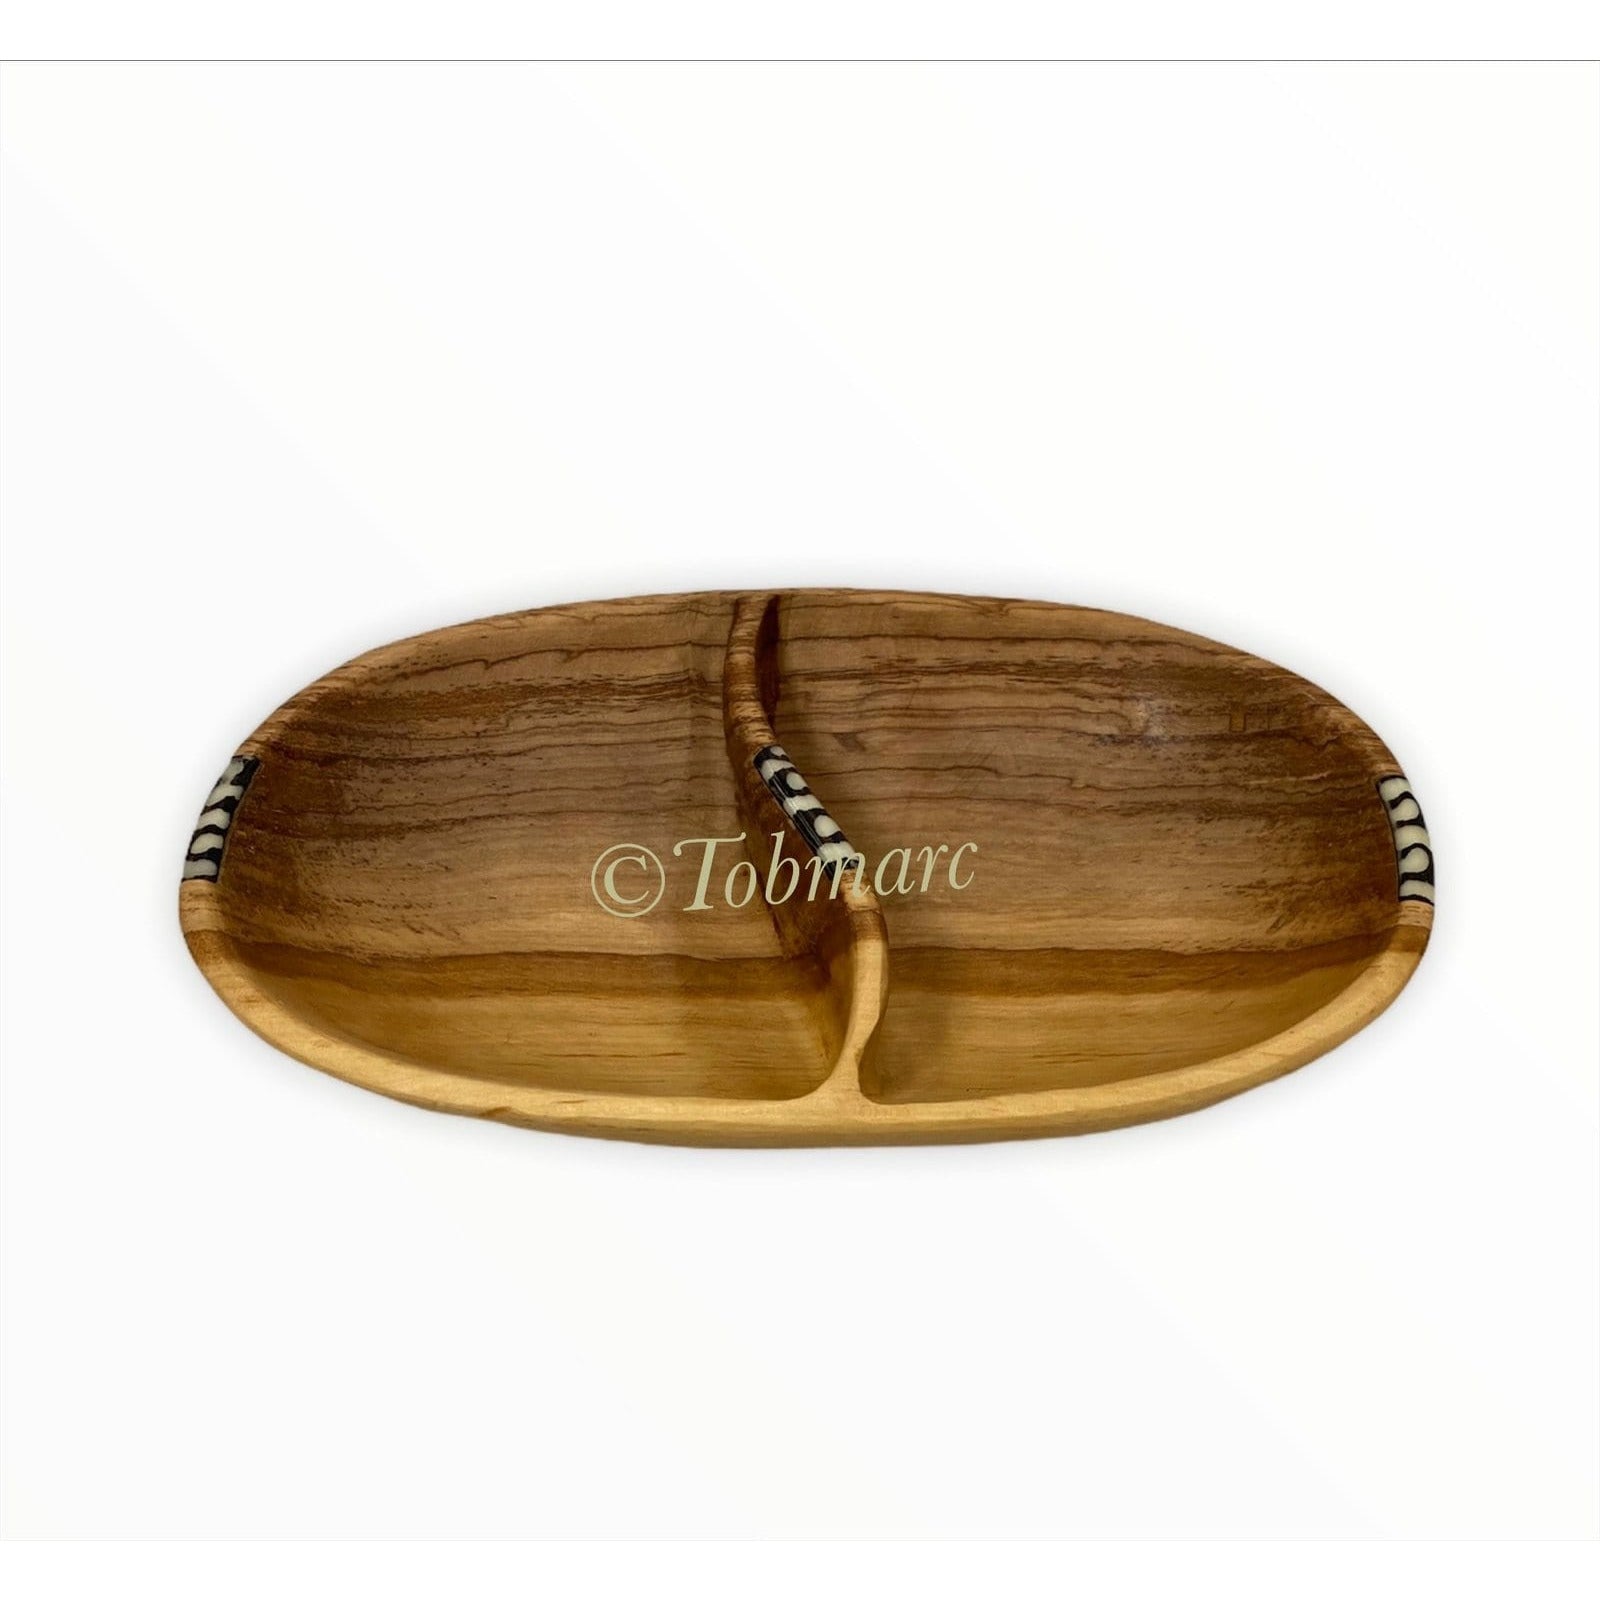 Tobmarc Home Decor & Gifts  Wooden Bowl Handmade oval wood bowl, Divided wood bowl, wooden snack bowl